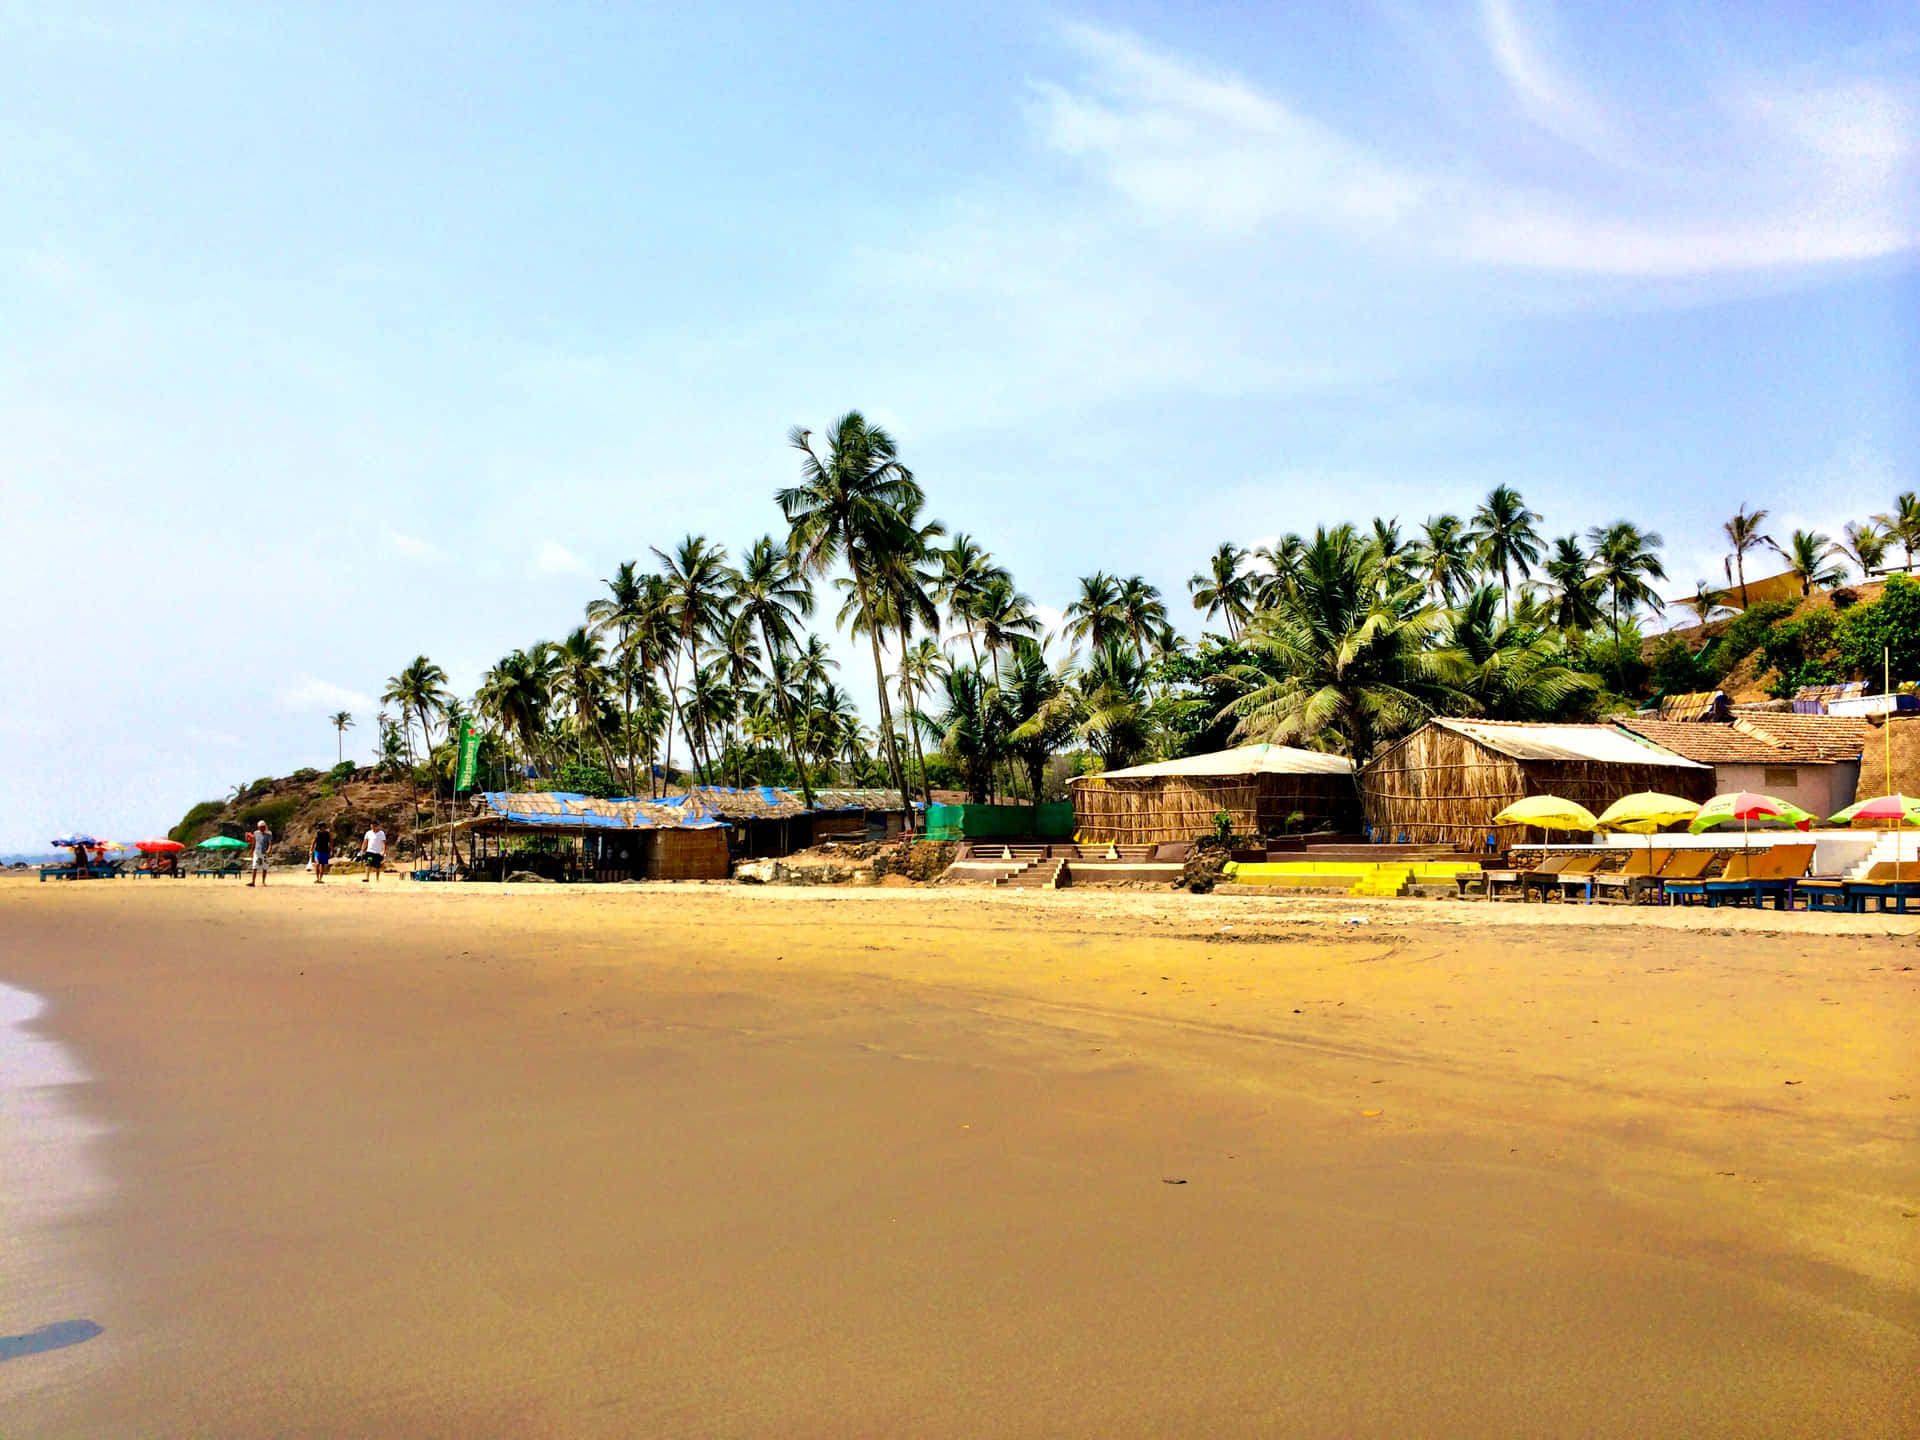 Enjoy a break from city life with a trip to the serene Goa Beach